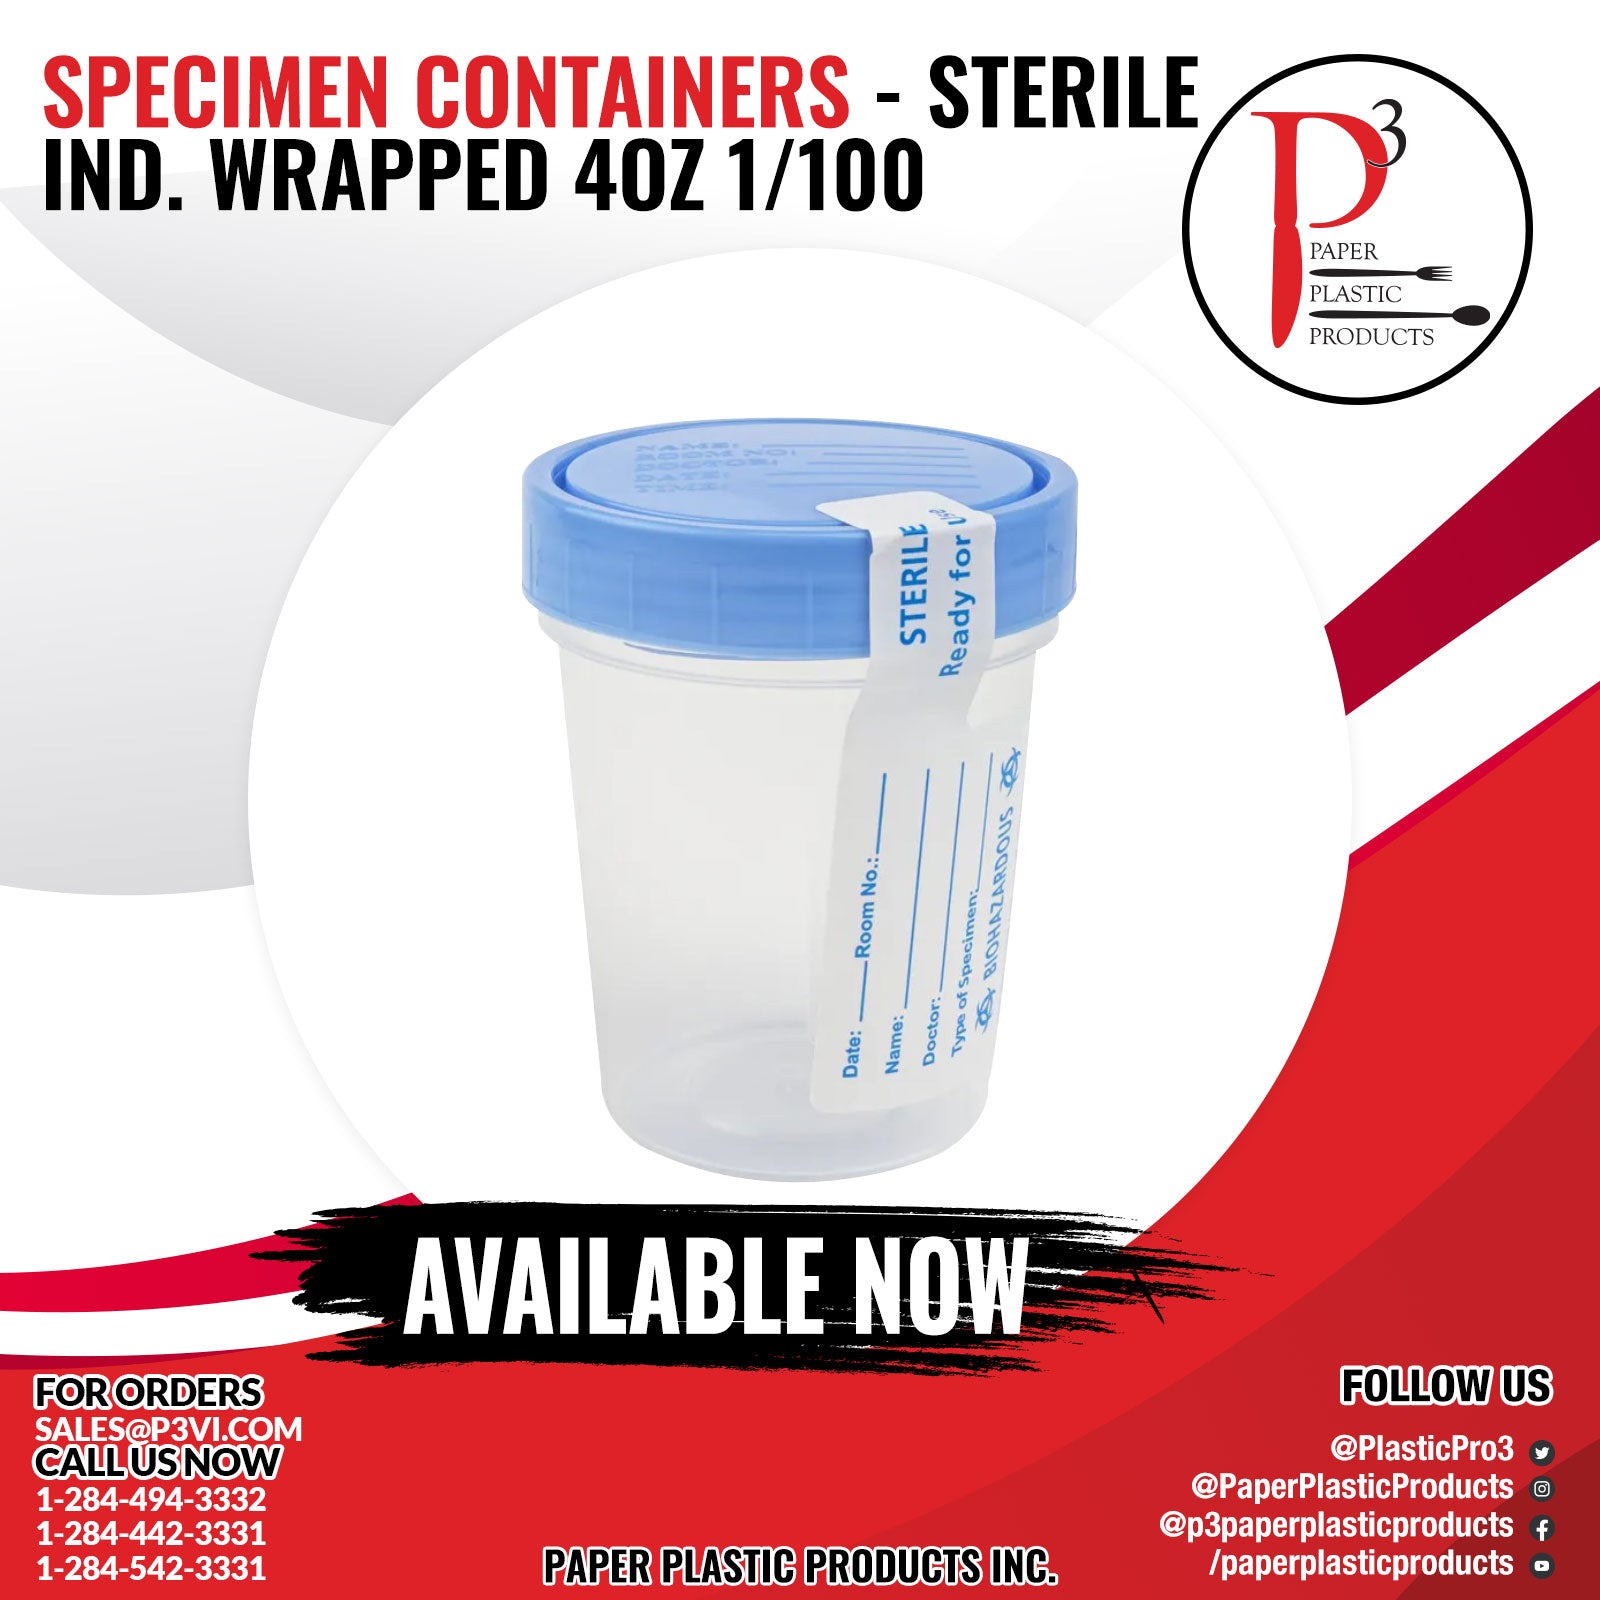 Specimen Containers - Sterile IND. Wrapped 4oz 1/100